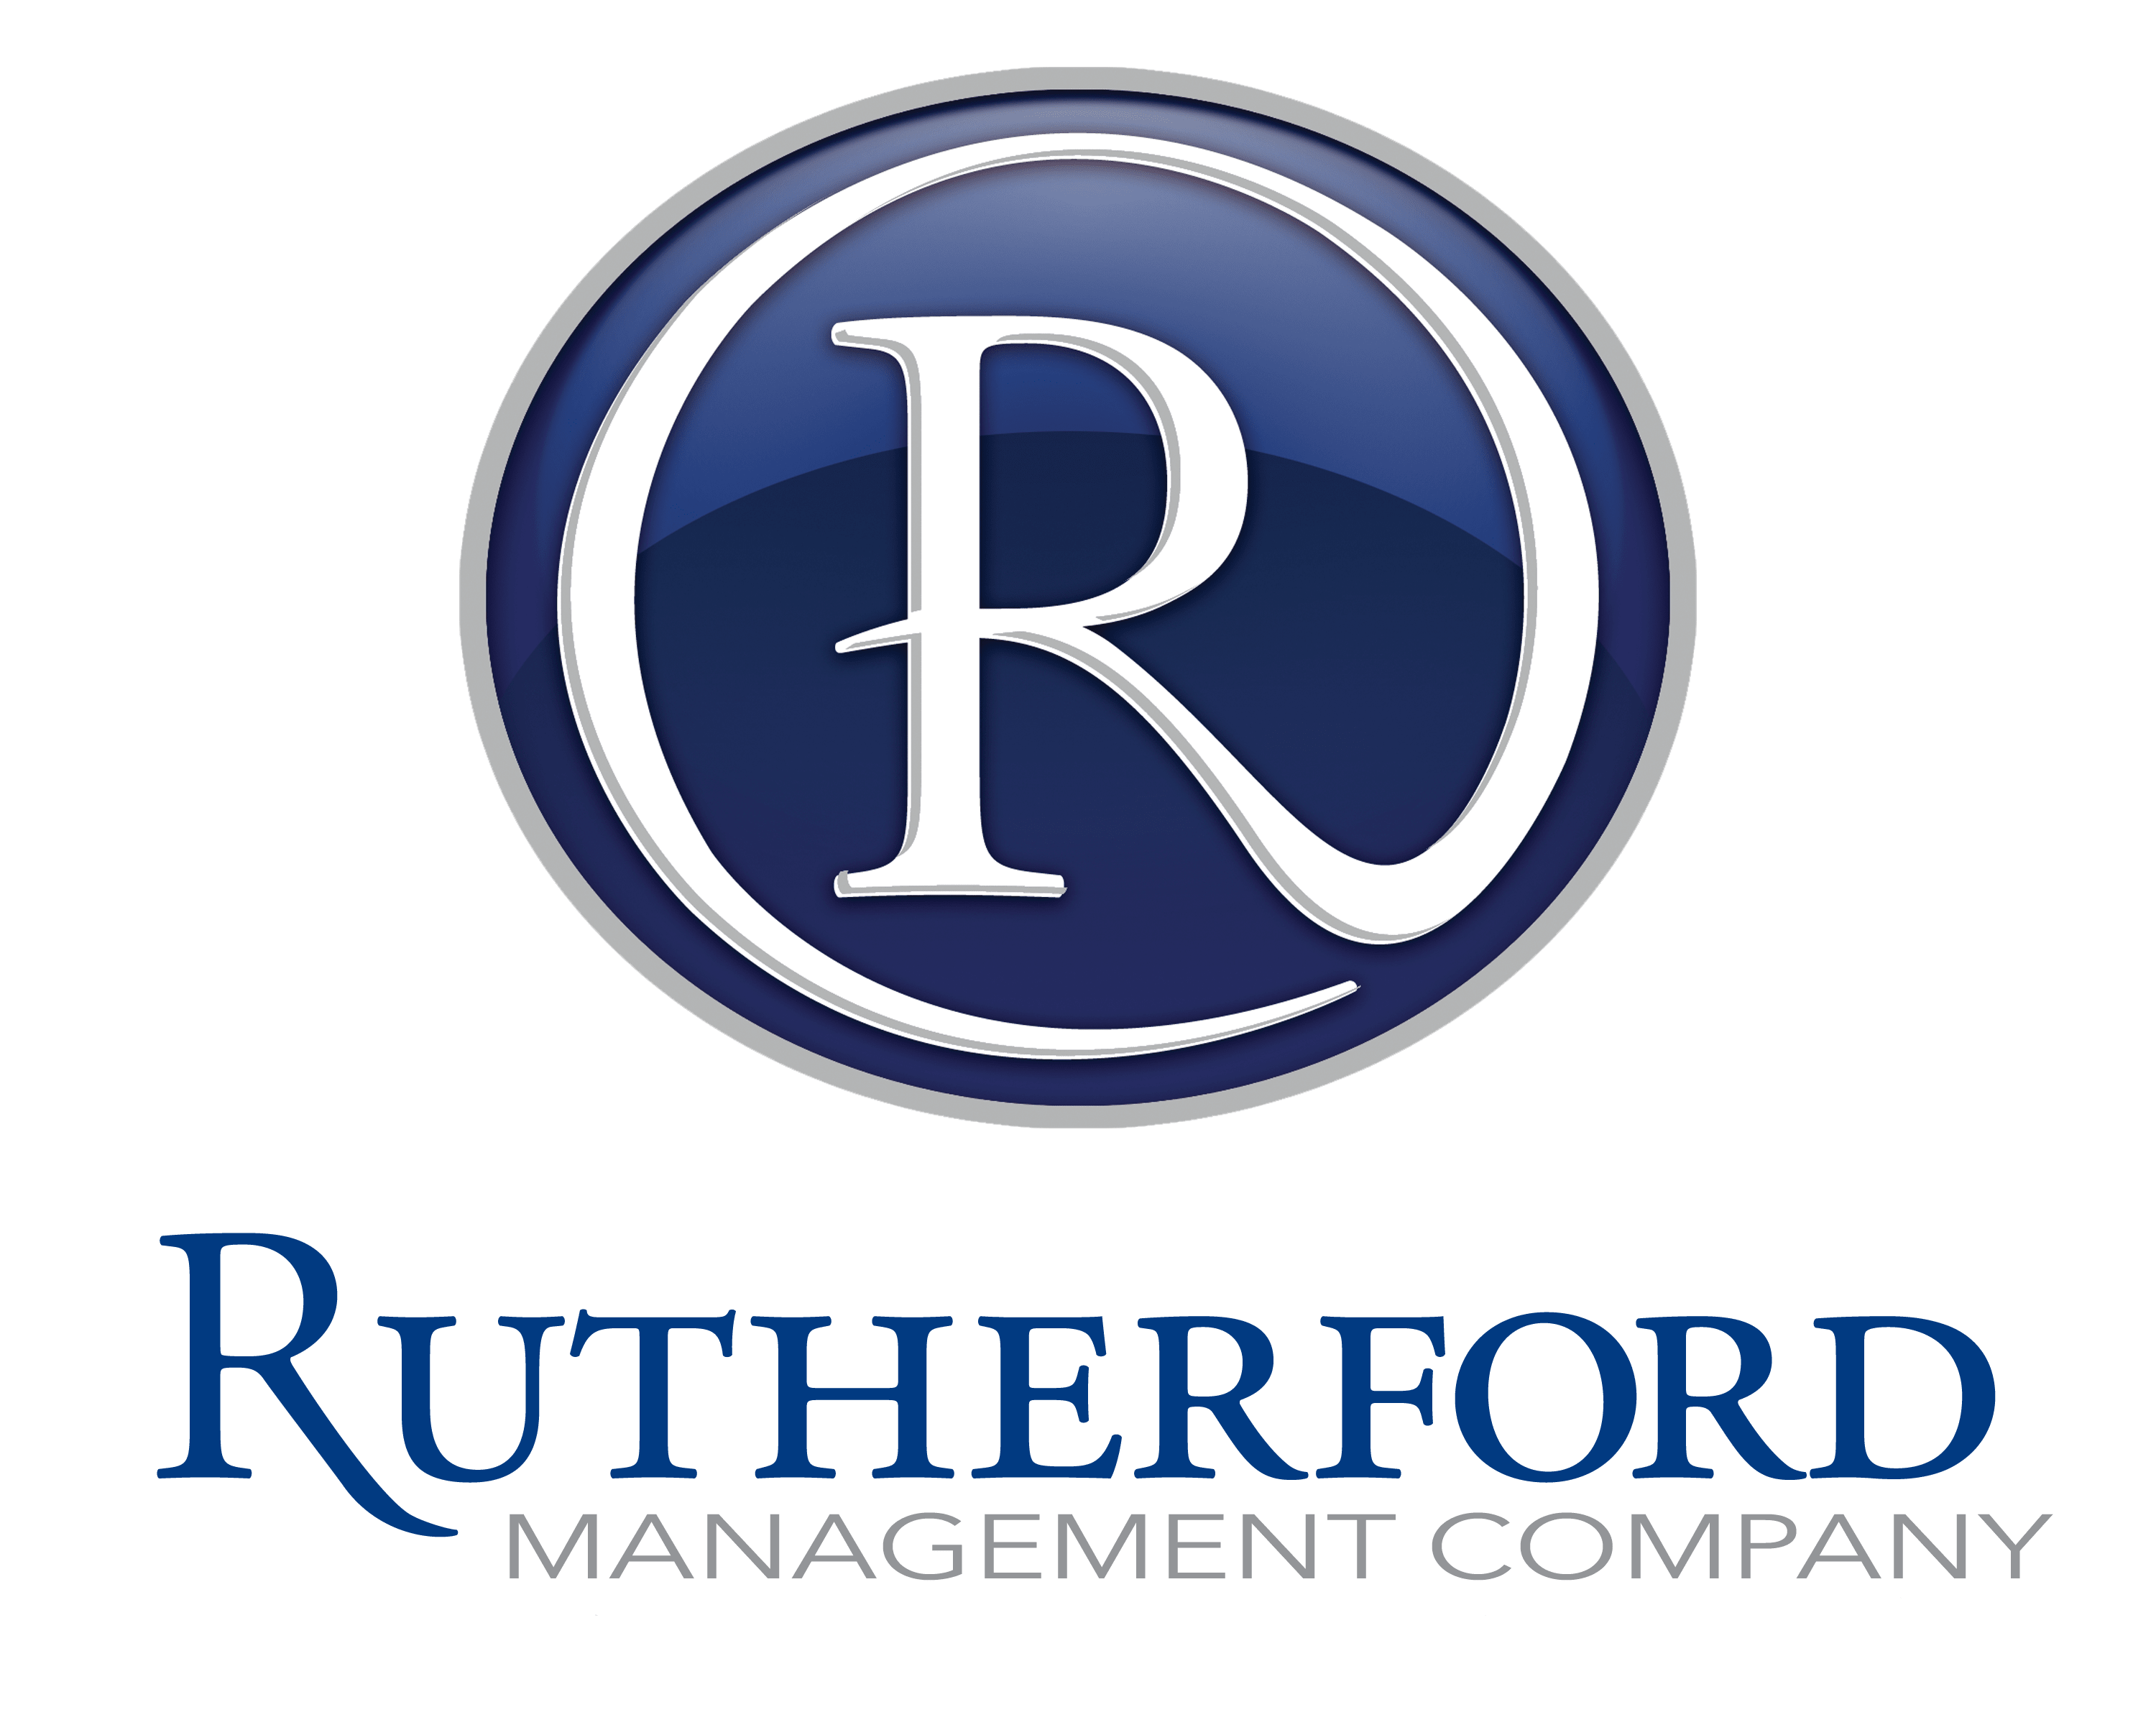 Rutherford Management Company